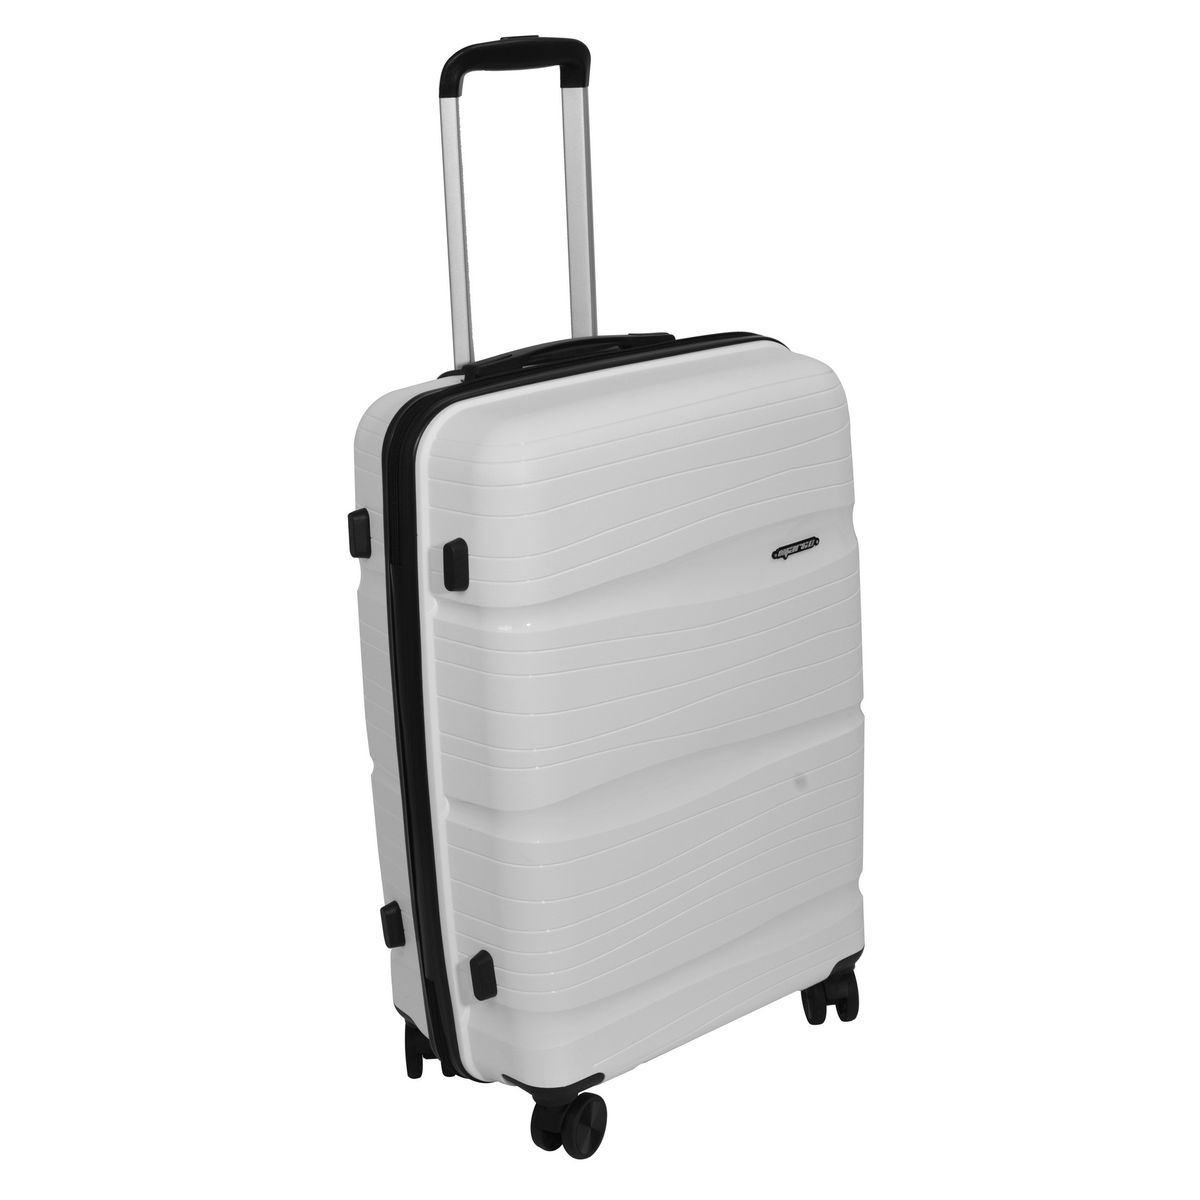 Marco Odyssey Light & Strong Polypropylene 24-inch Luggage Bag - White ...